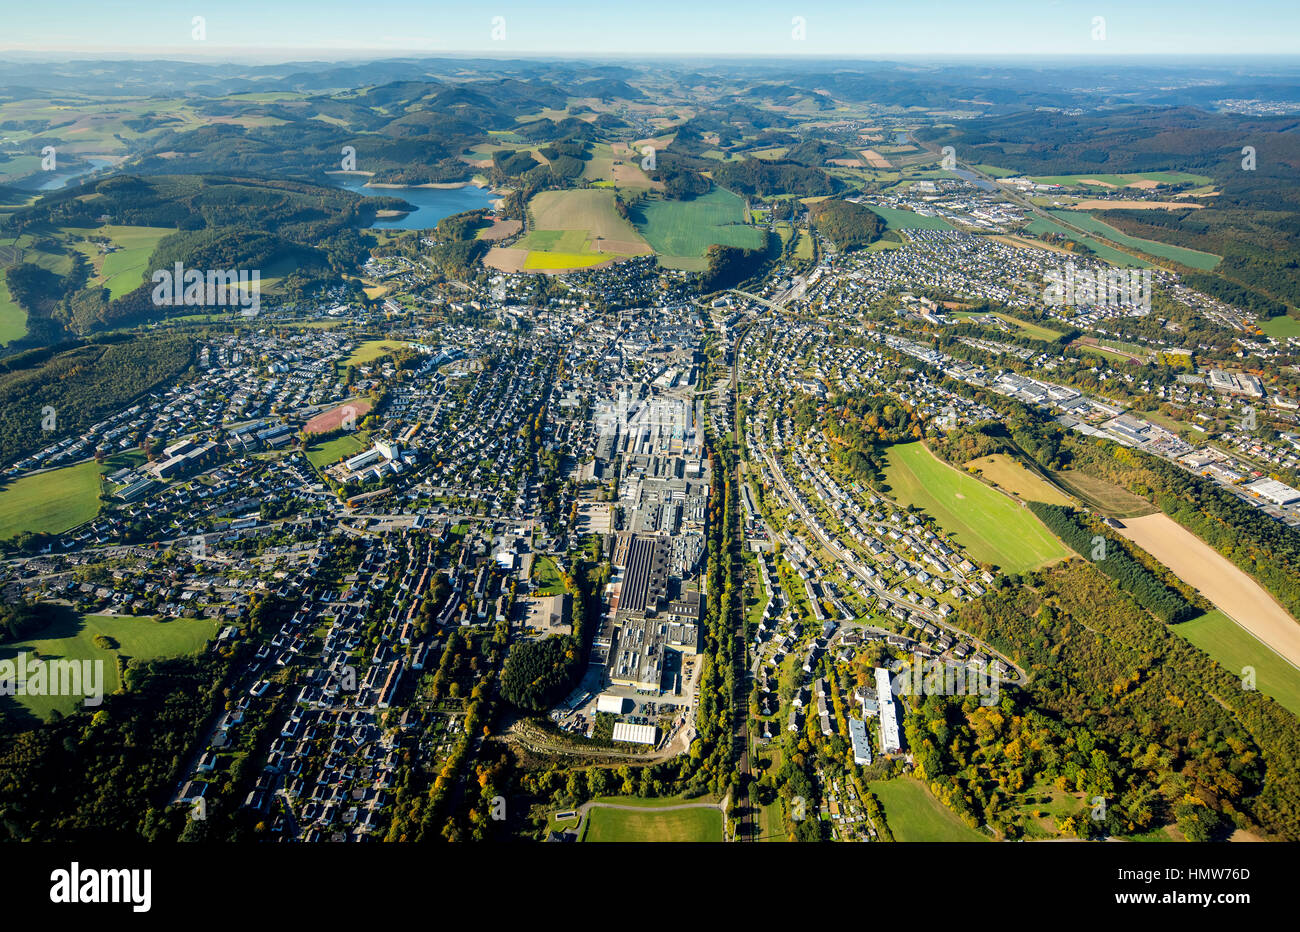 View of Meschede from 1,000 meters above, aerial, Meschede, Sauerland, North Rhine-Westphalia, Germany Stock Photo